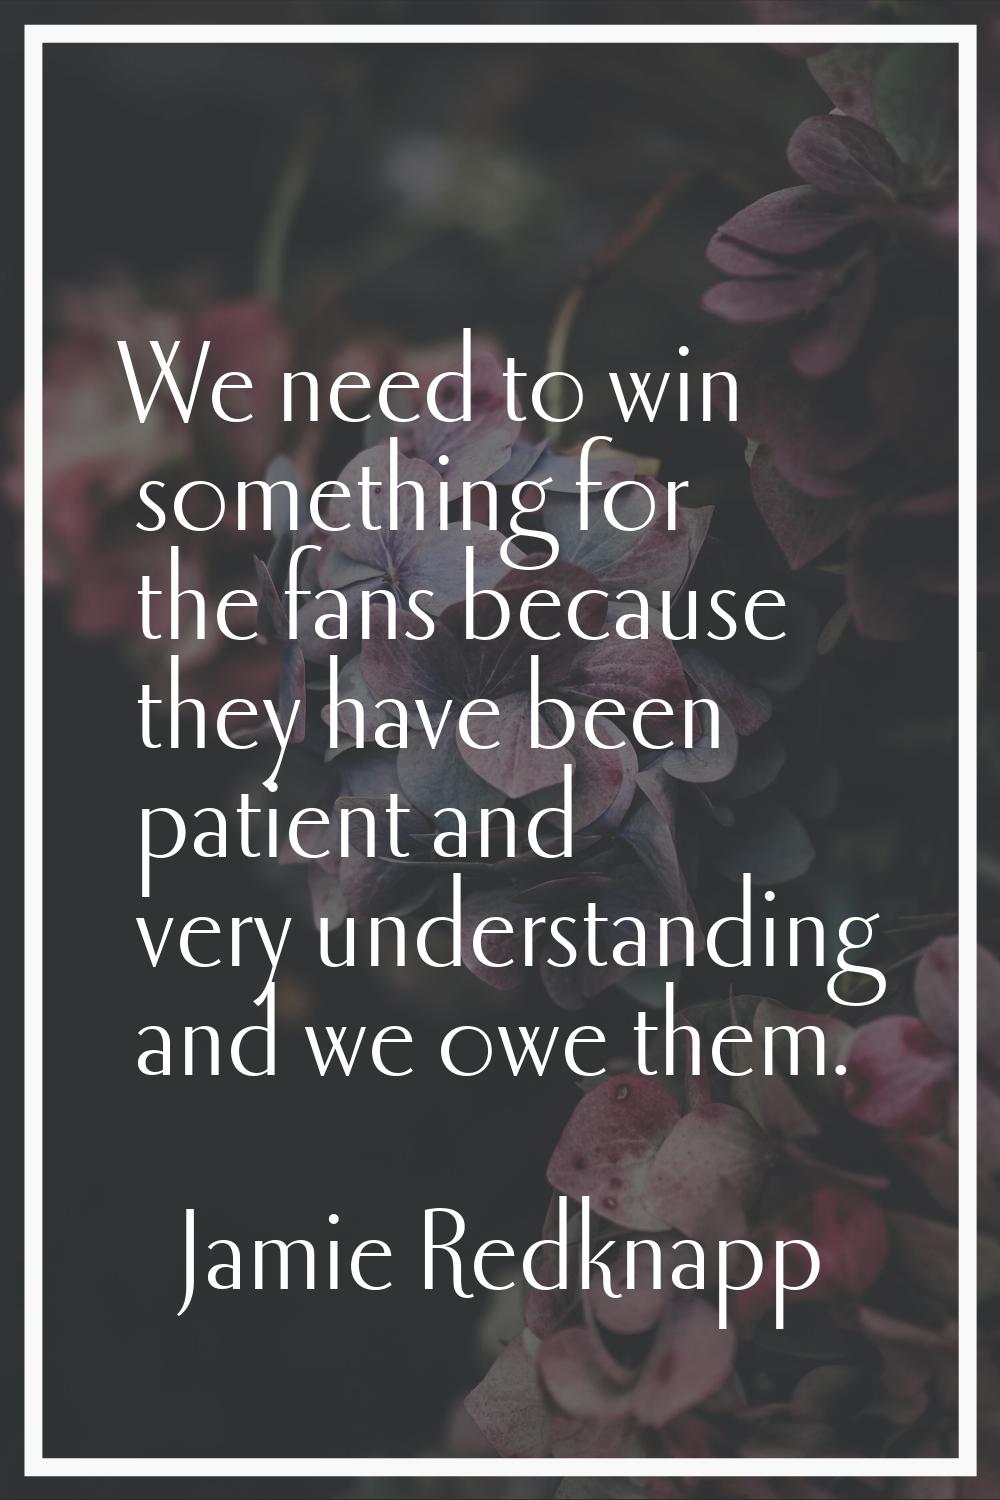 We need to win something for the fans because they have been patient and very understanding and we 